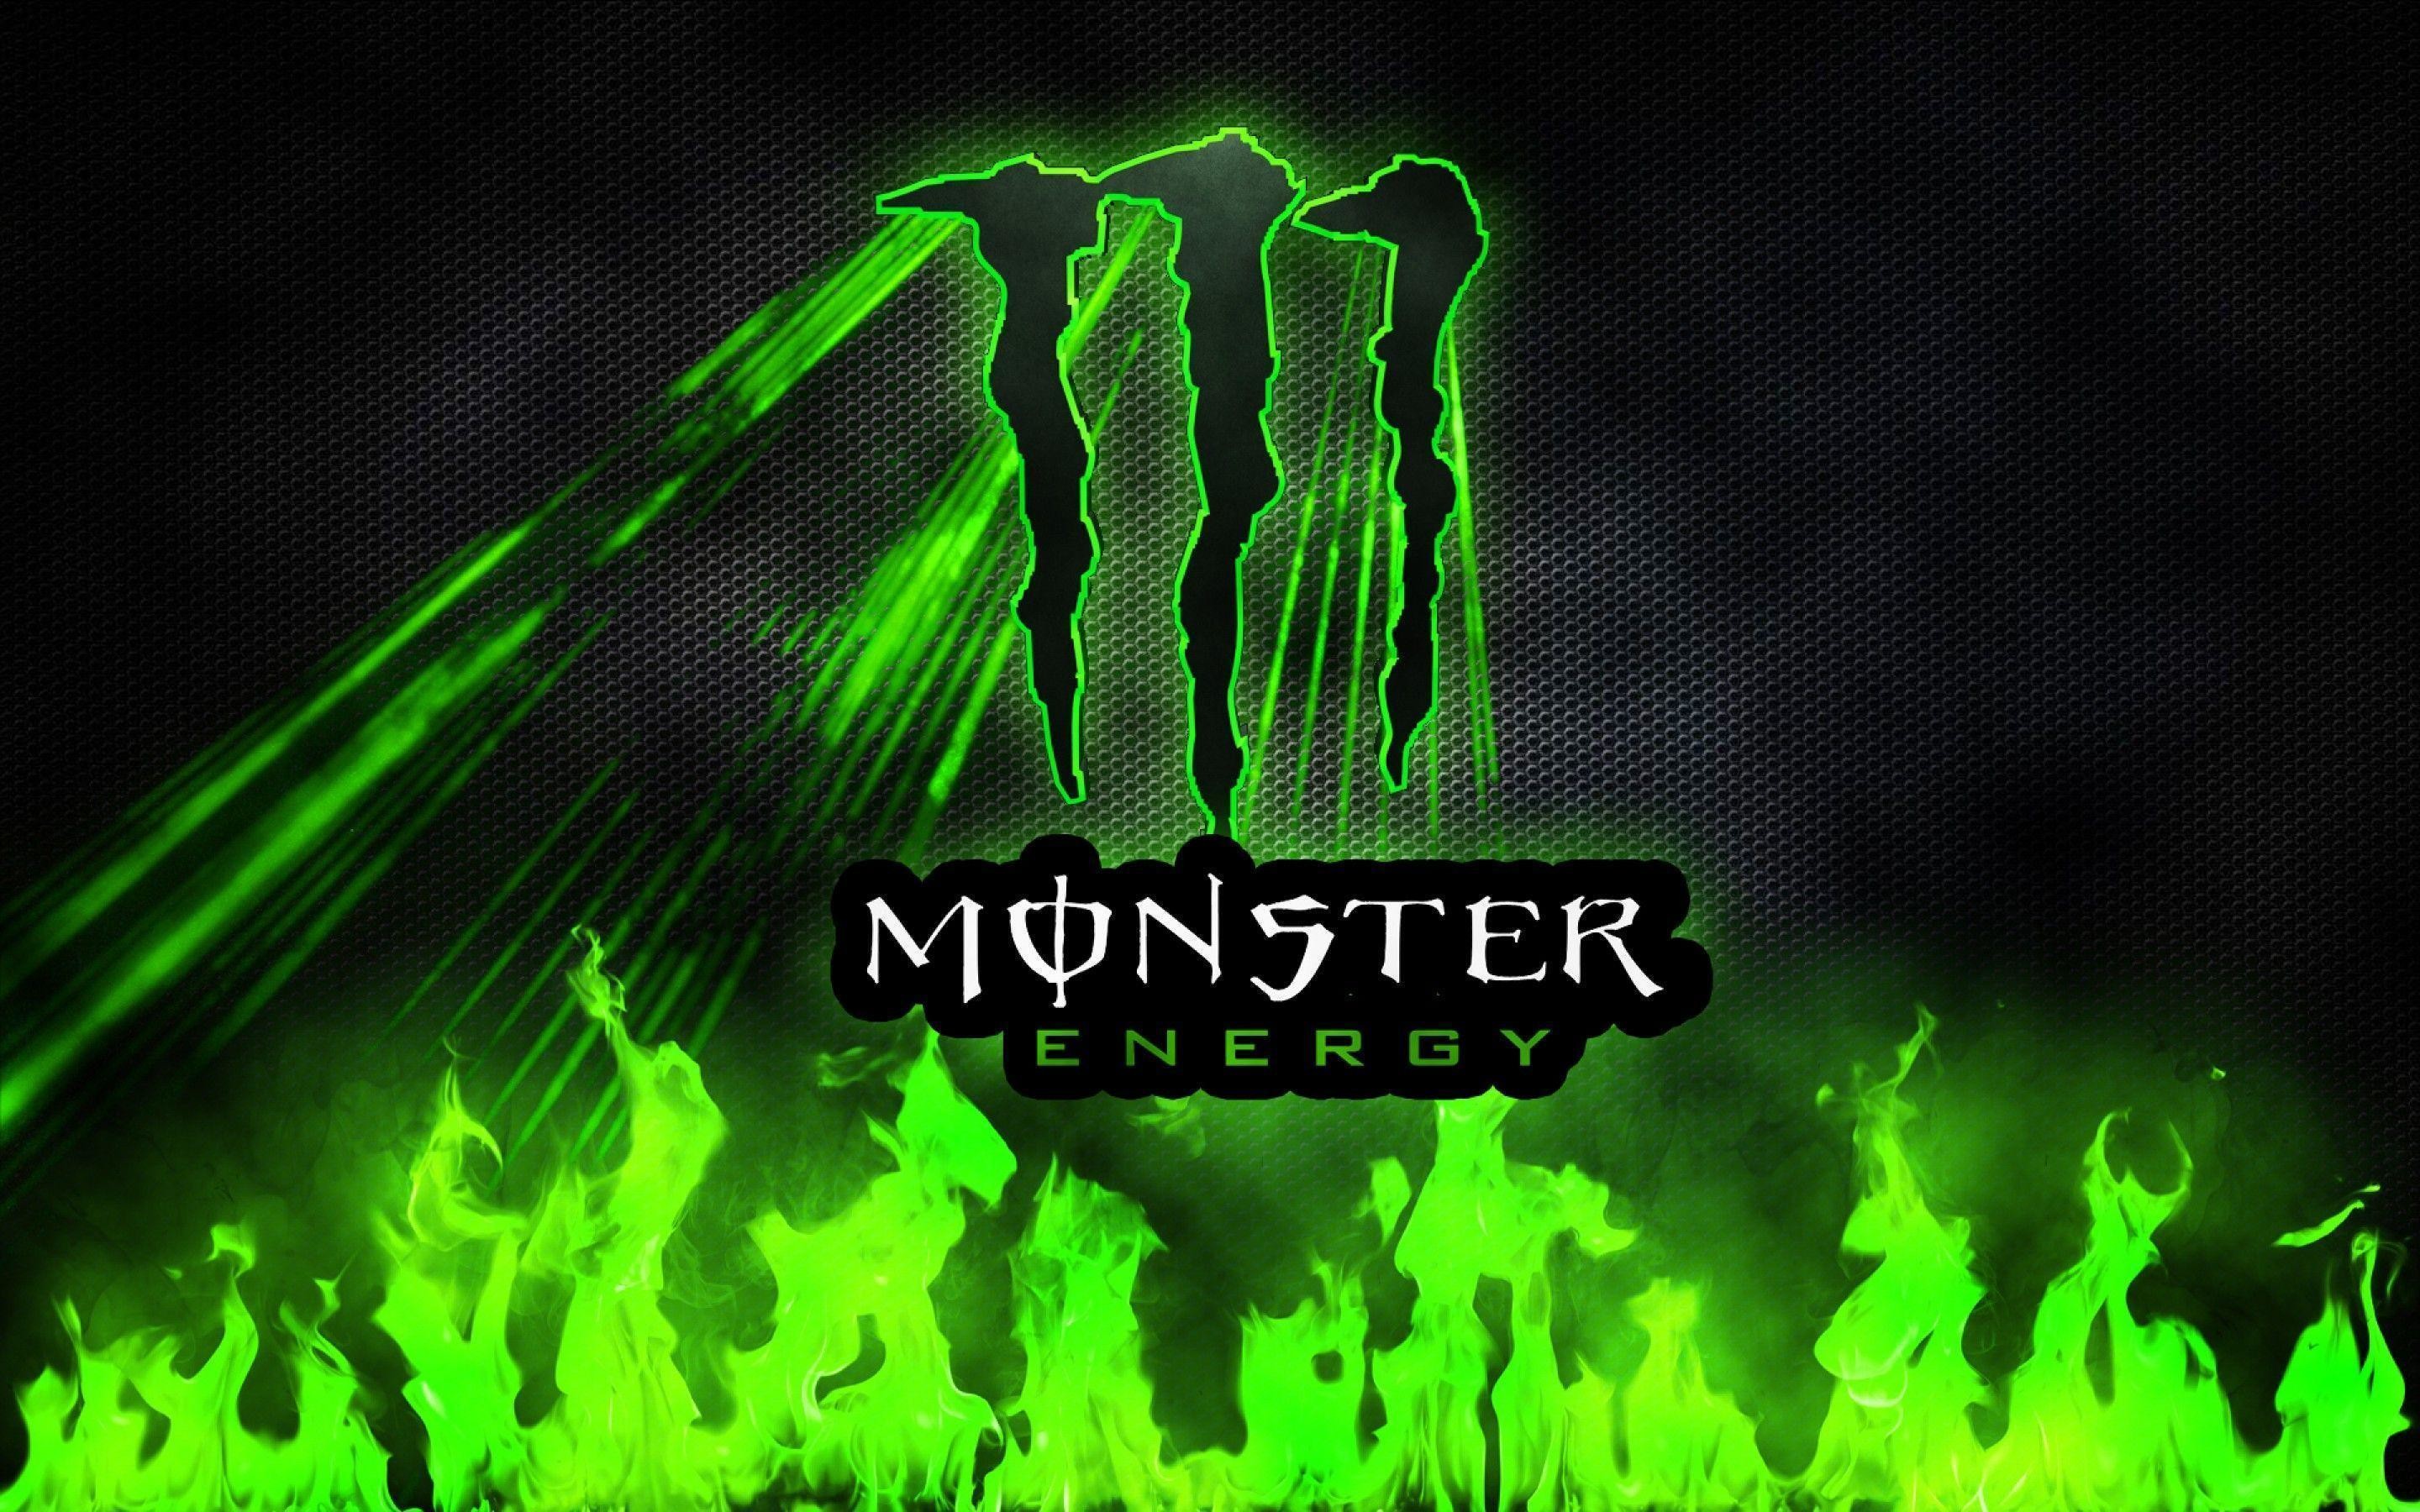 2880x1800 Monster Energy wallpaper HD 2016 in Others | Wallpapers HD